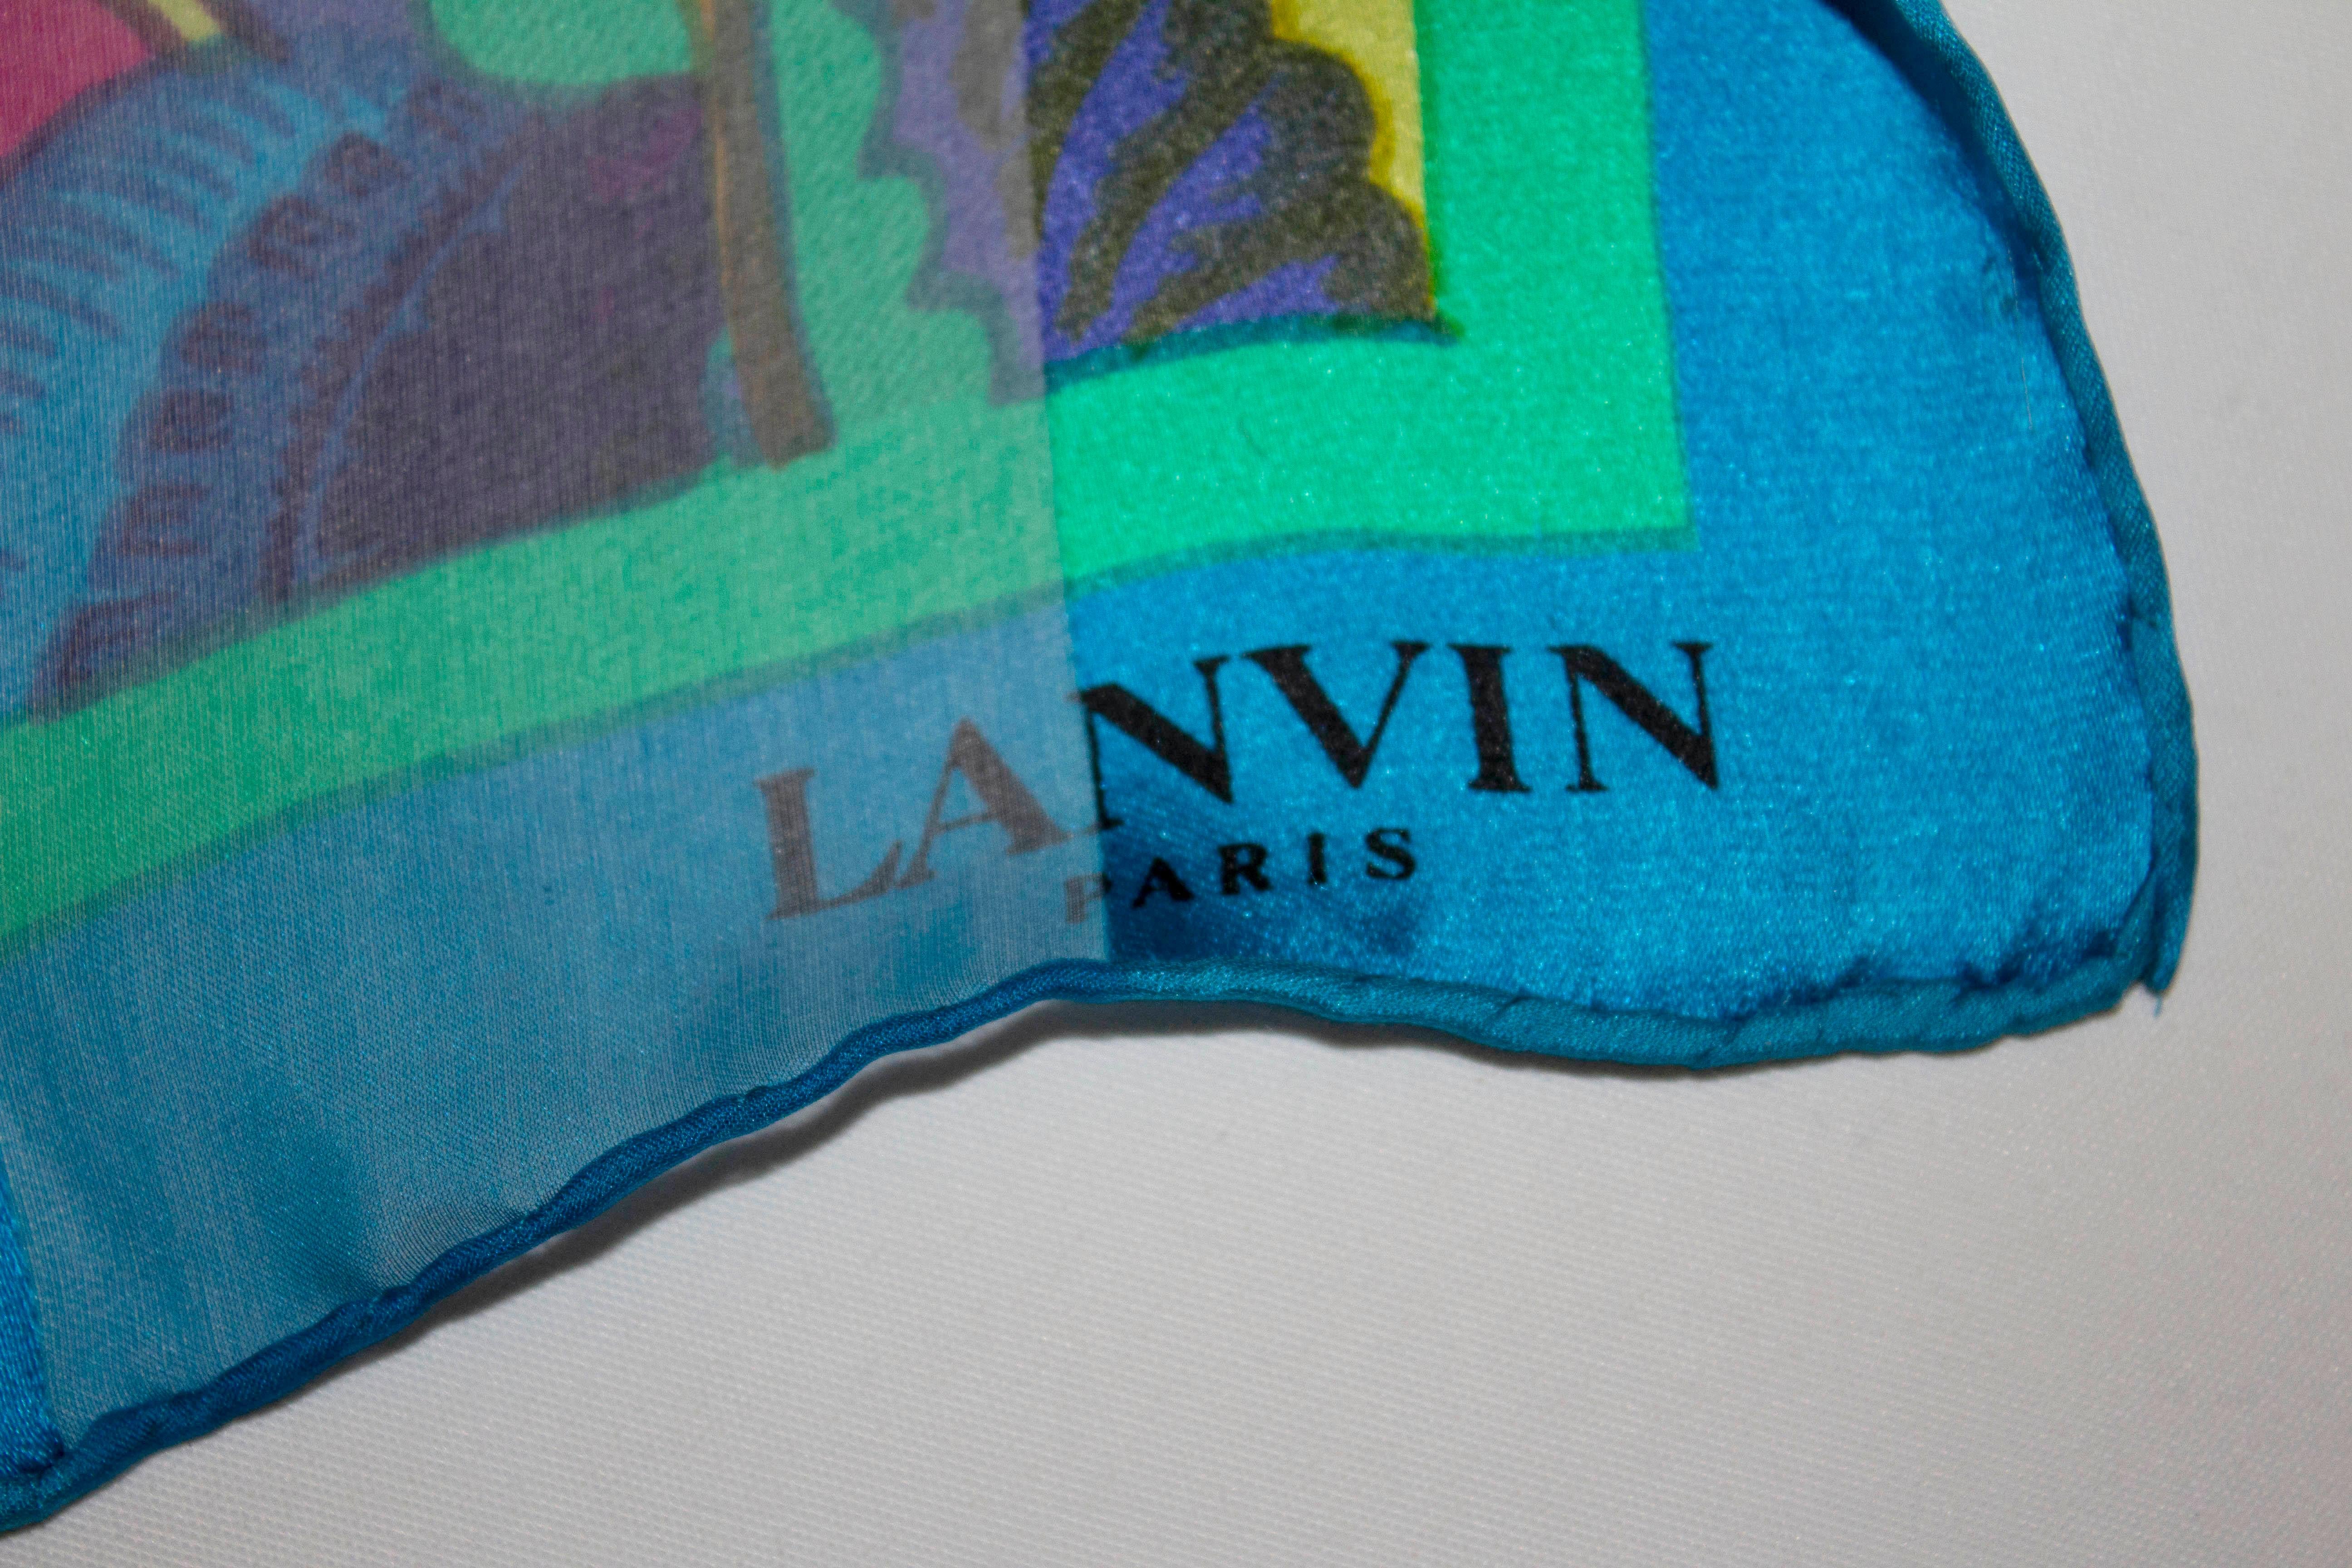 A stunning silk scarf for Spring / Summer by Lanvin Paris. The scarf has hand rolled edge with a blue border, floral design and stripe background. 
Measurements : 35'' x 35''